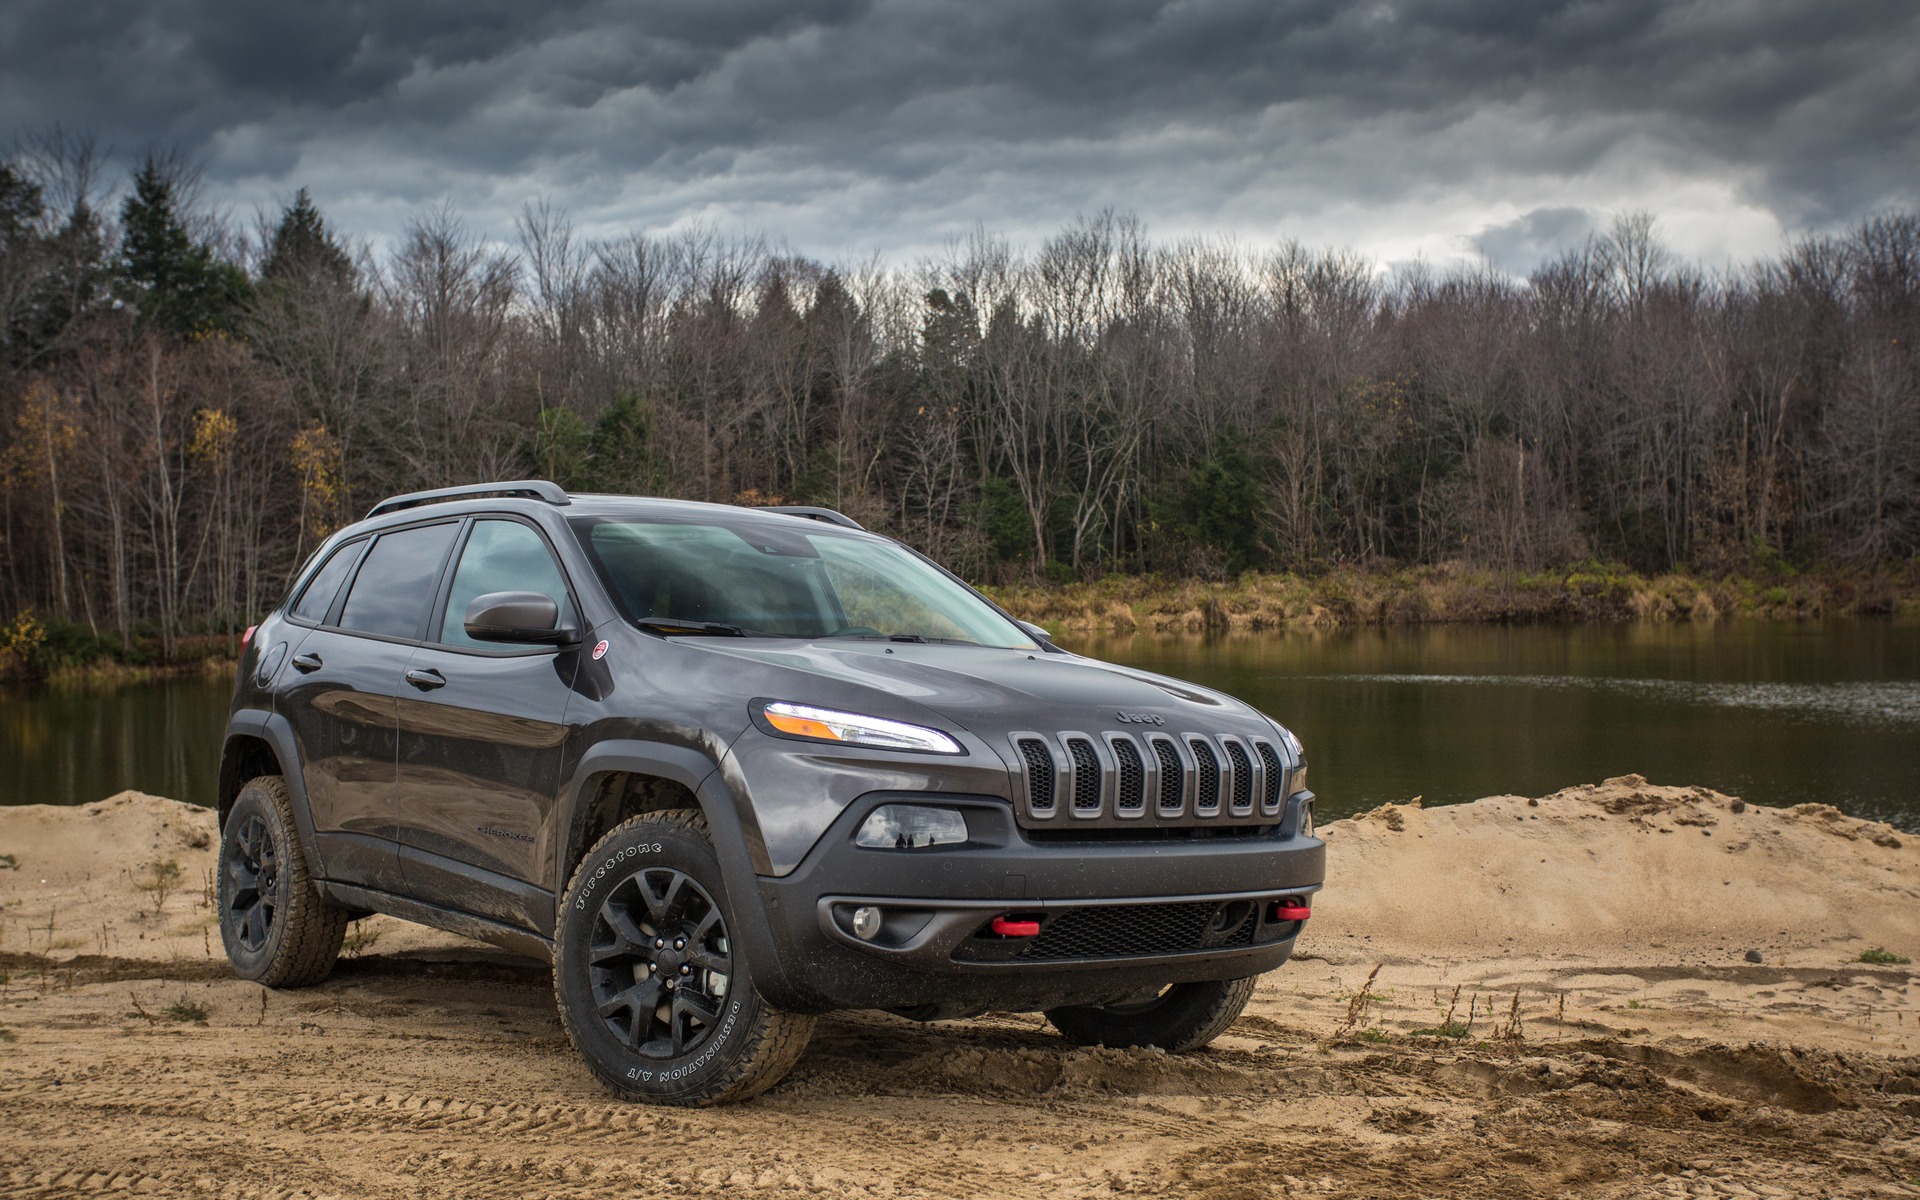 A Recall For The Jeep Cherokee 1/4